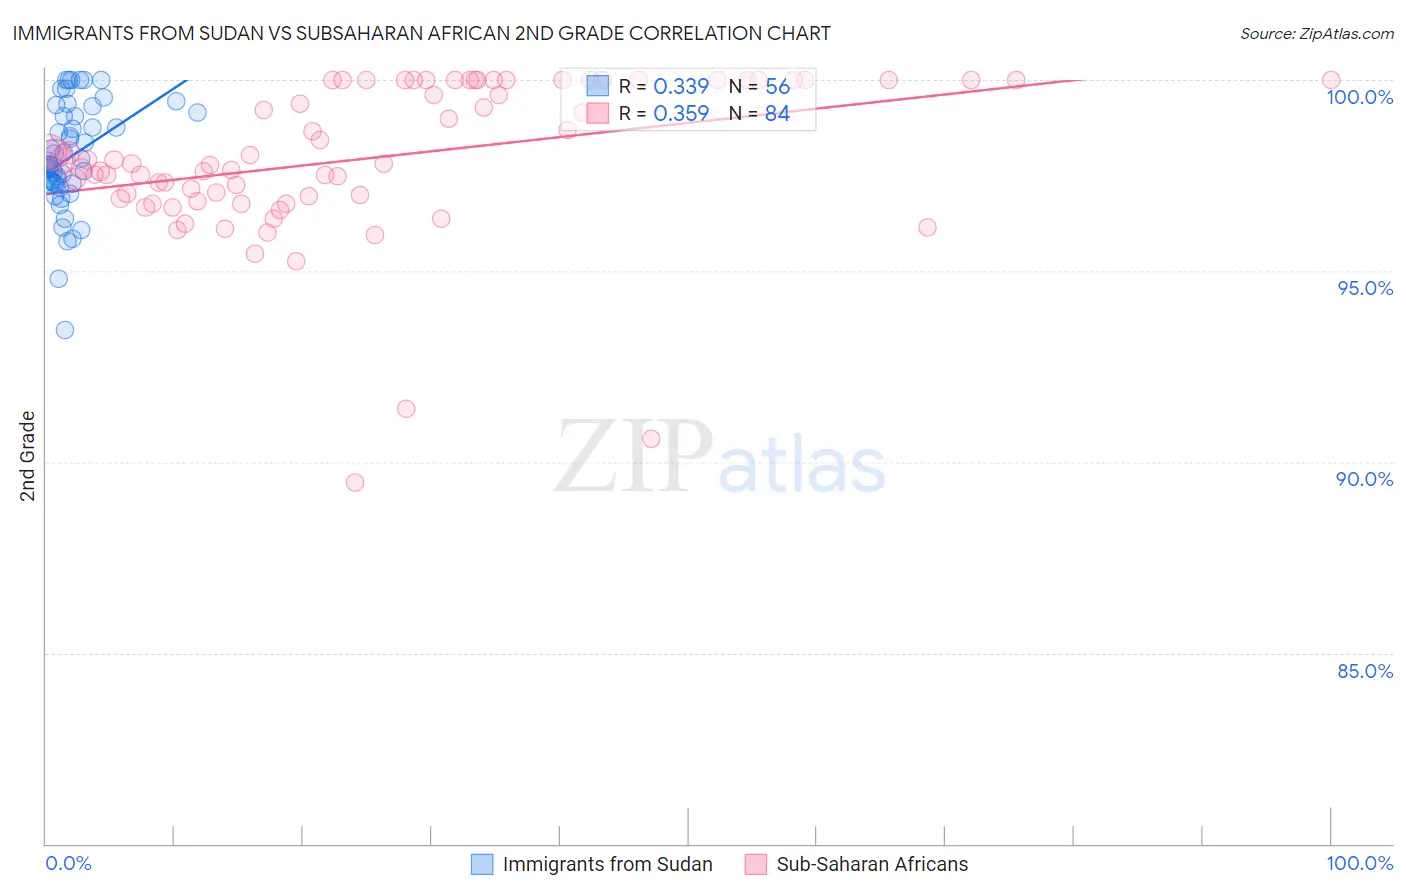 Immigrants from Sudan vs Subsaharan African 2nd Grade